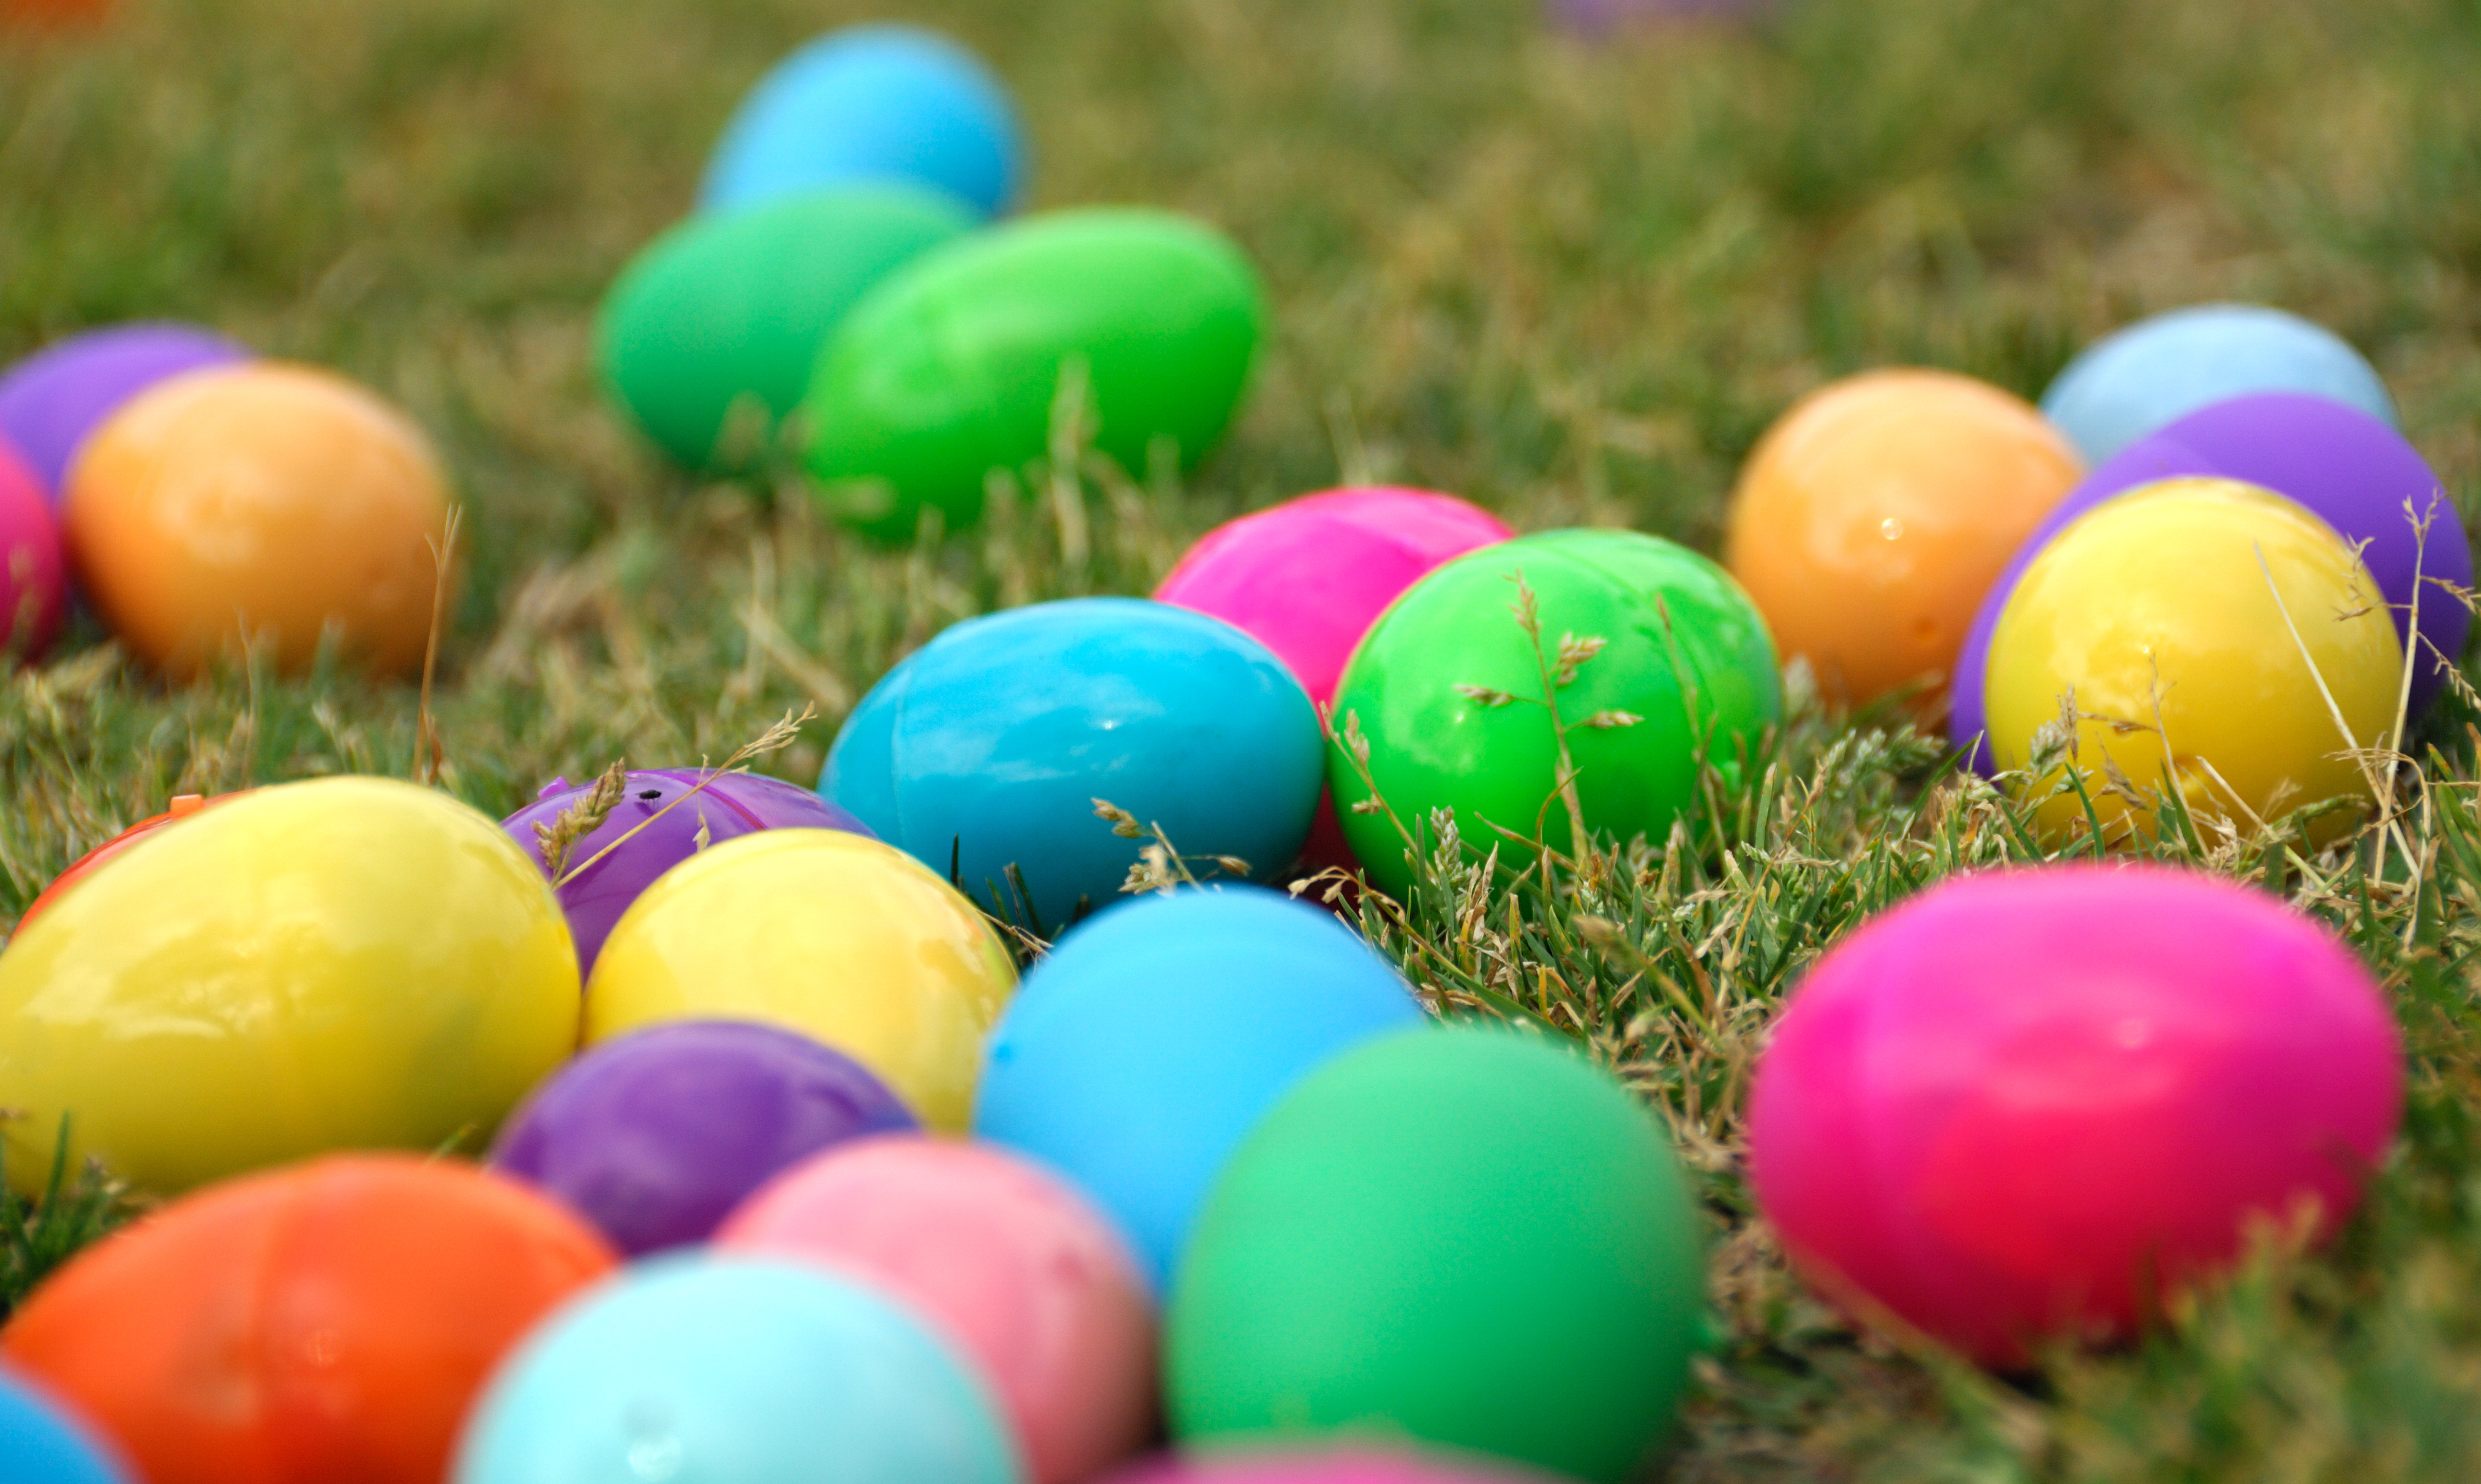 Survey determines Easter spending habits in the U.S. - News Now Warsaw